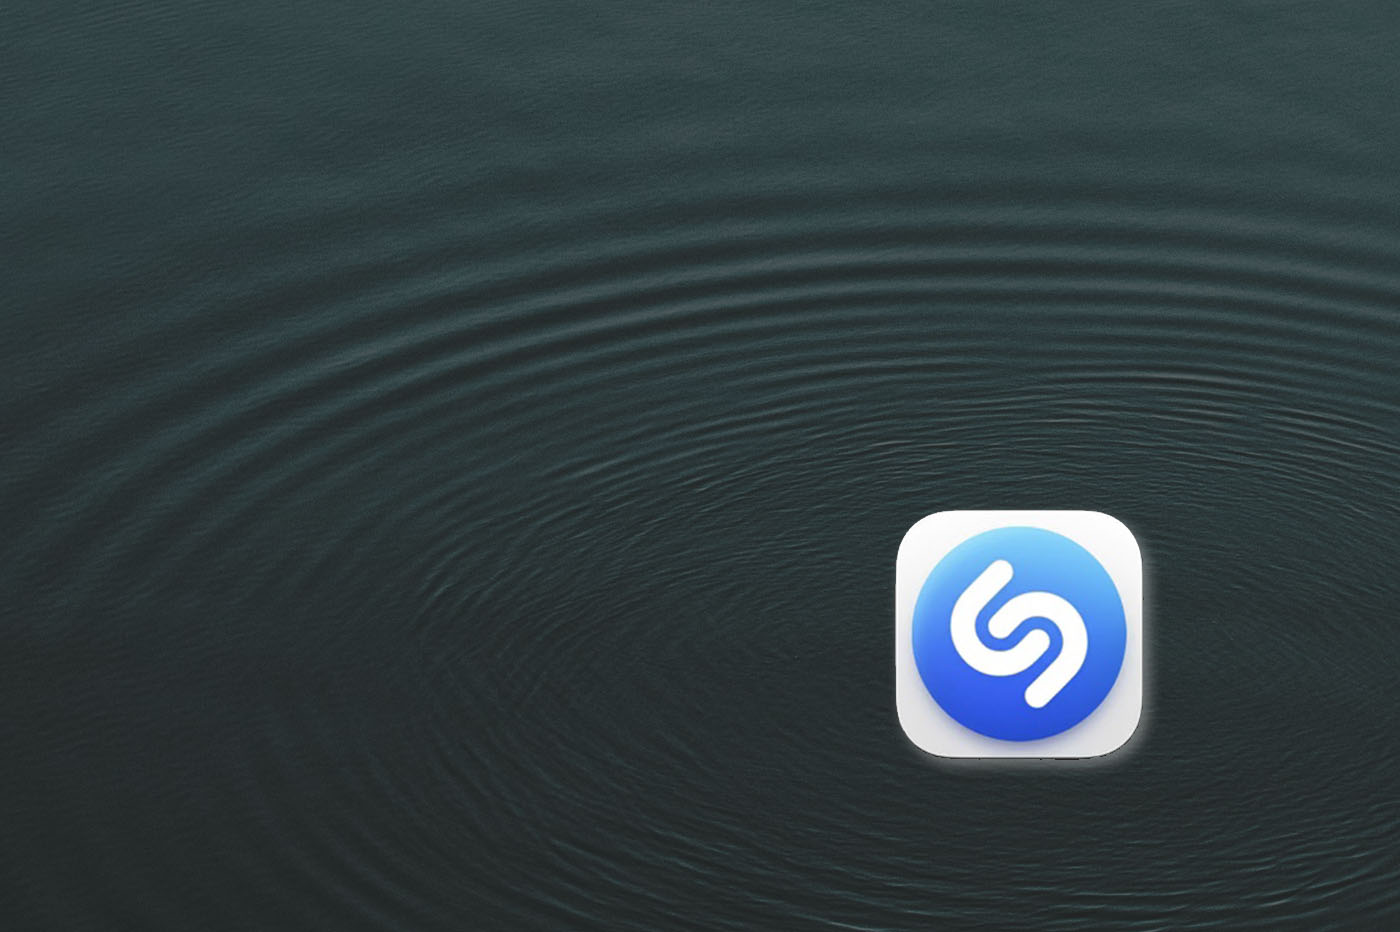 Top 13 Shazam Wallpapers in 4K and Full HD That You Must Download